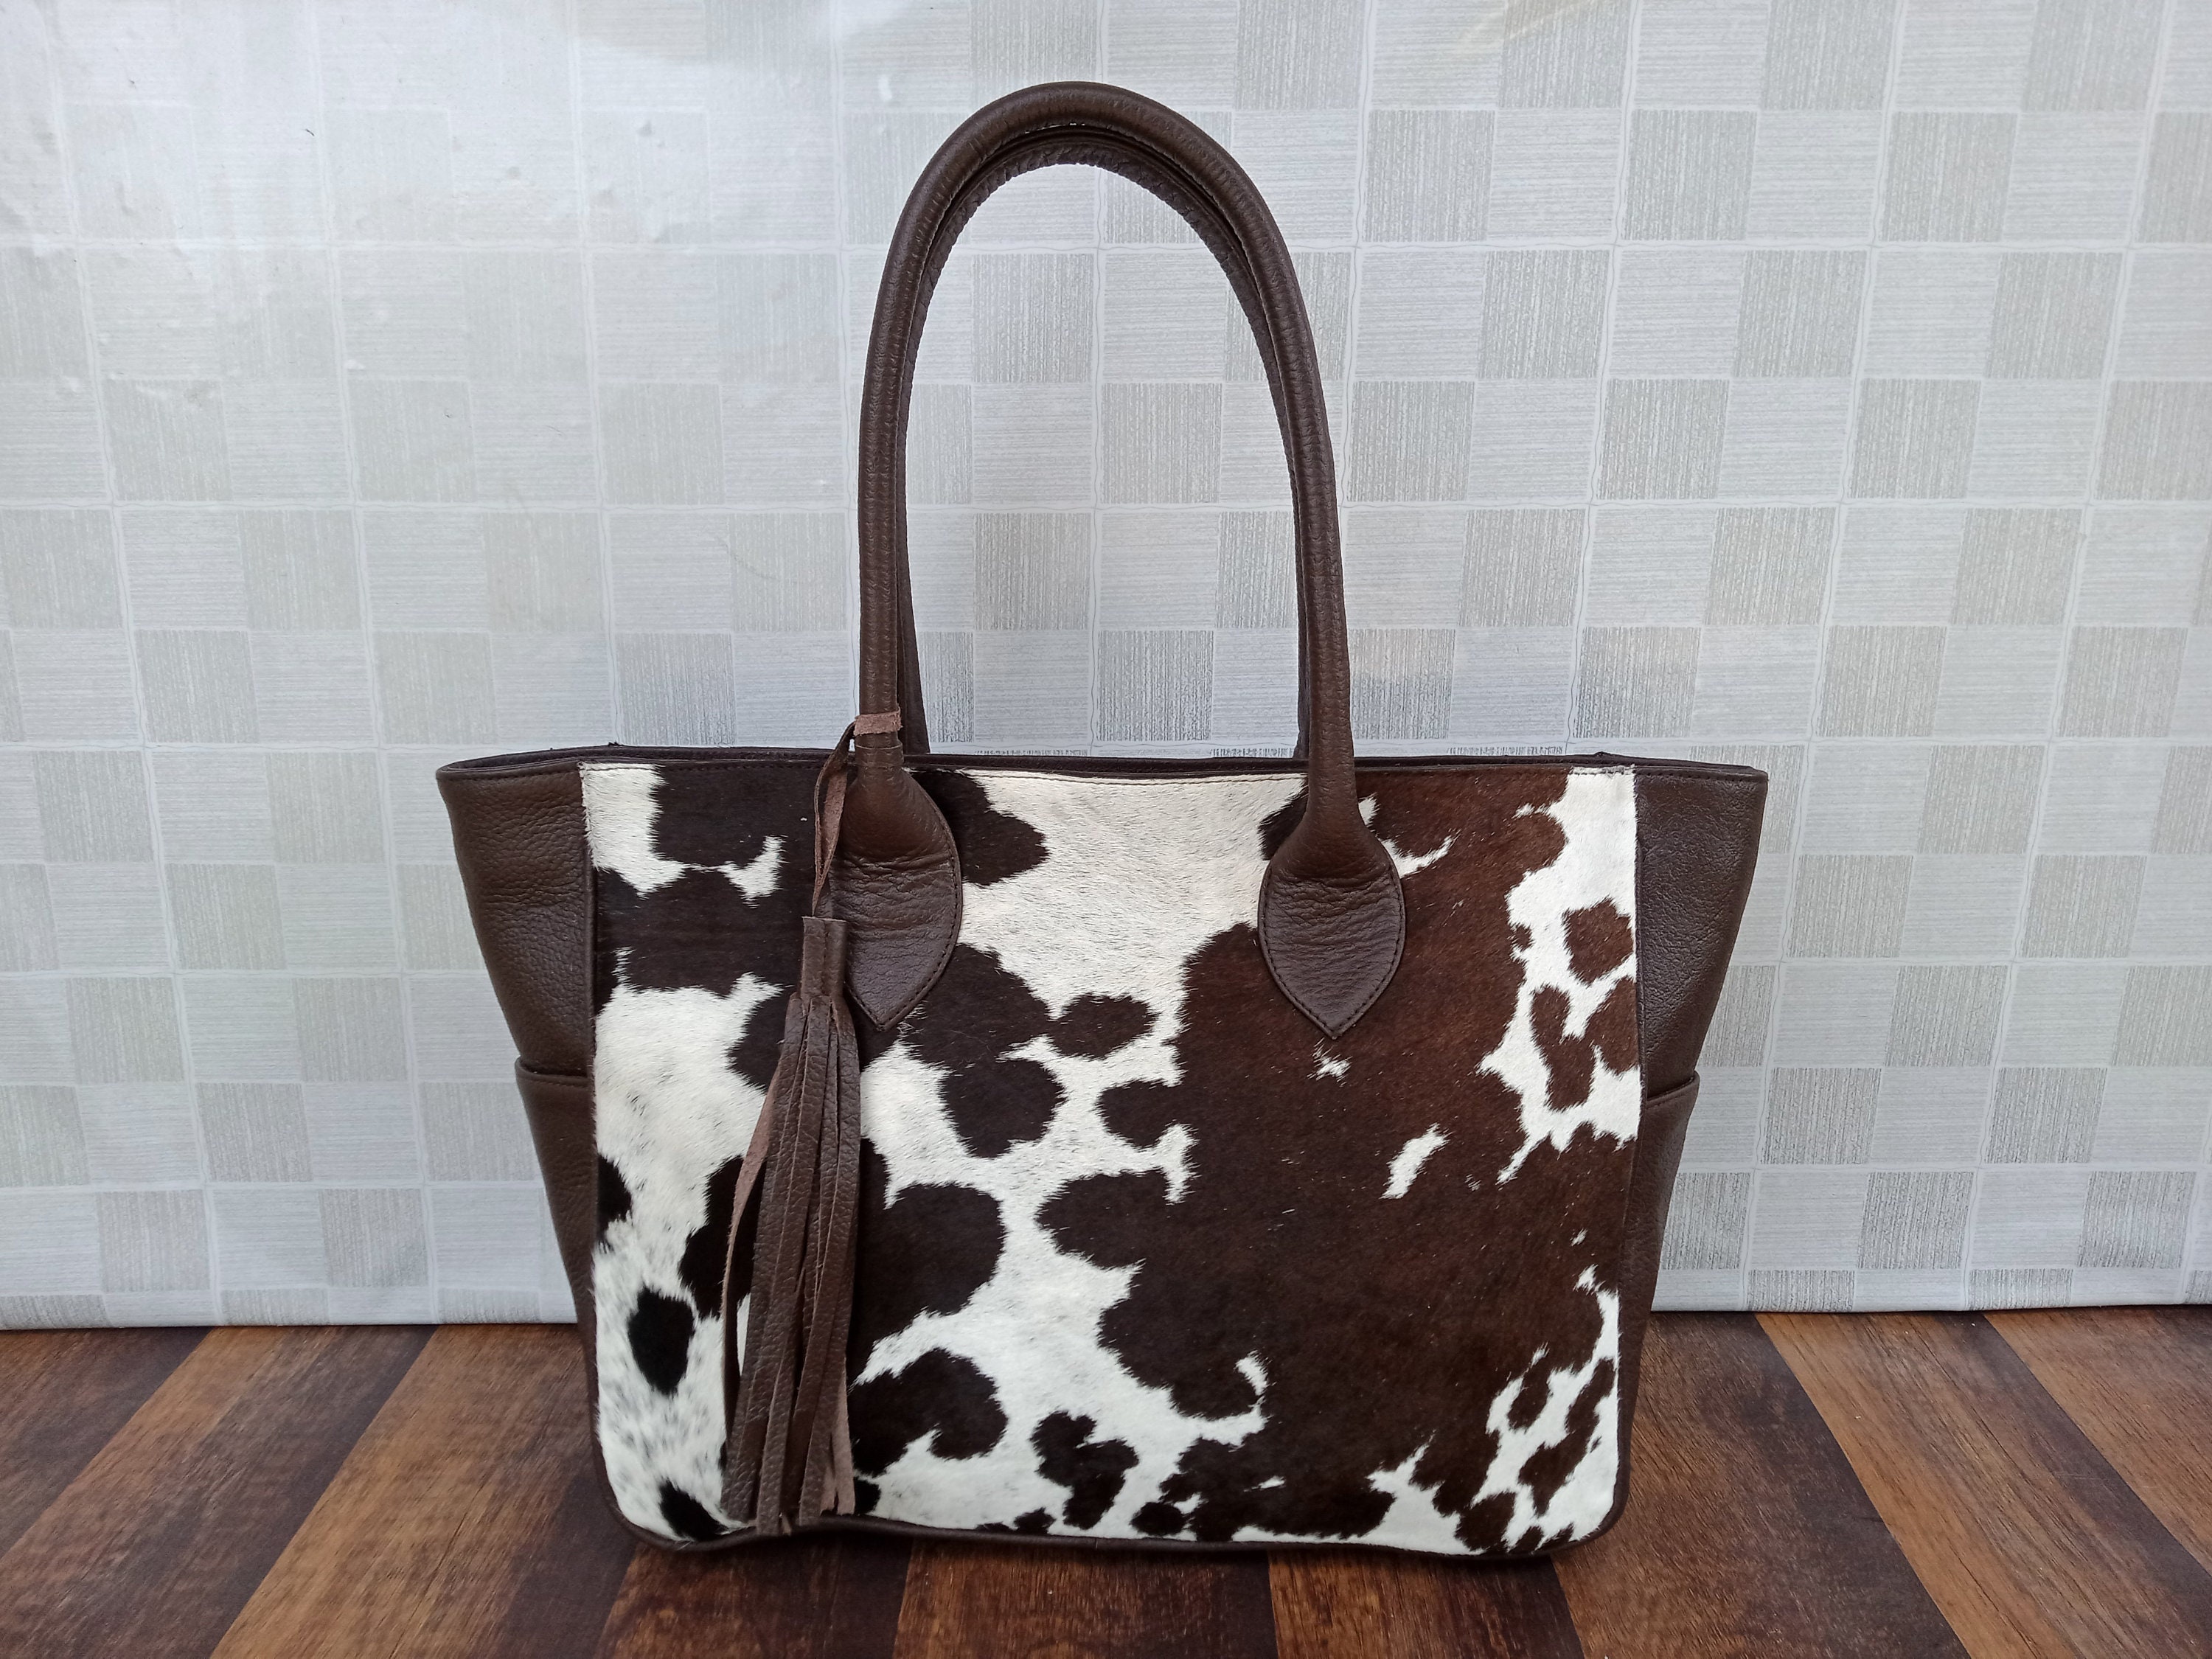 20 sf Garments Handbags Chocolate Brown and Accessories Natural Grain Lightly Finished Cow Leather for Arts and Crafts 